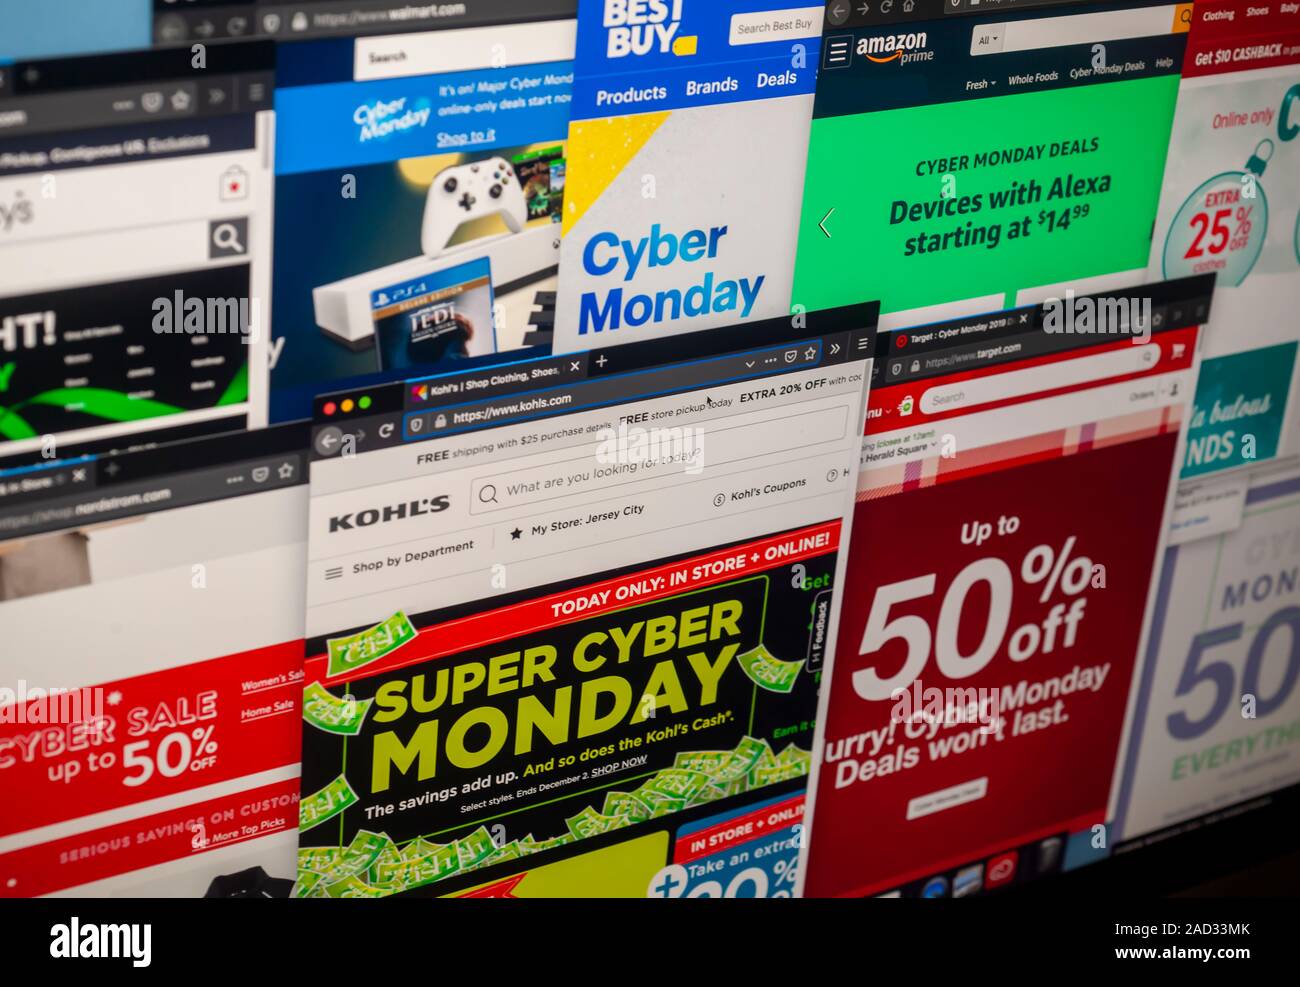 Black Friday pulled in a record $6.22 billion in online sales: Adobe